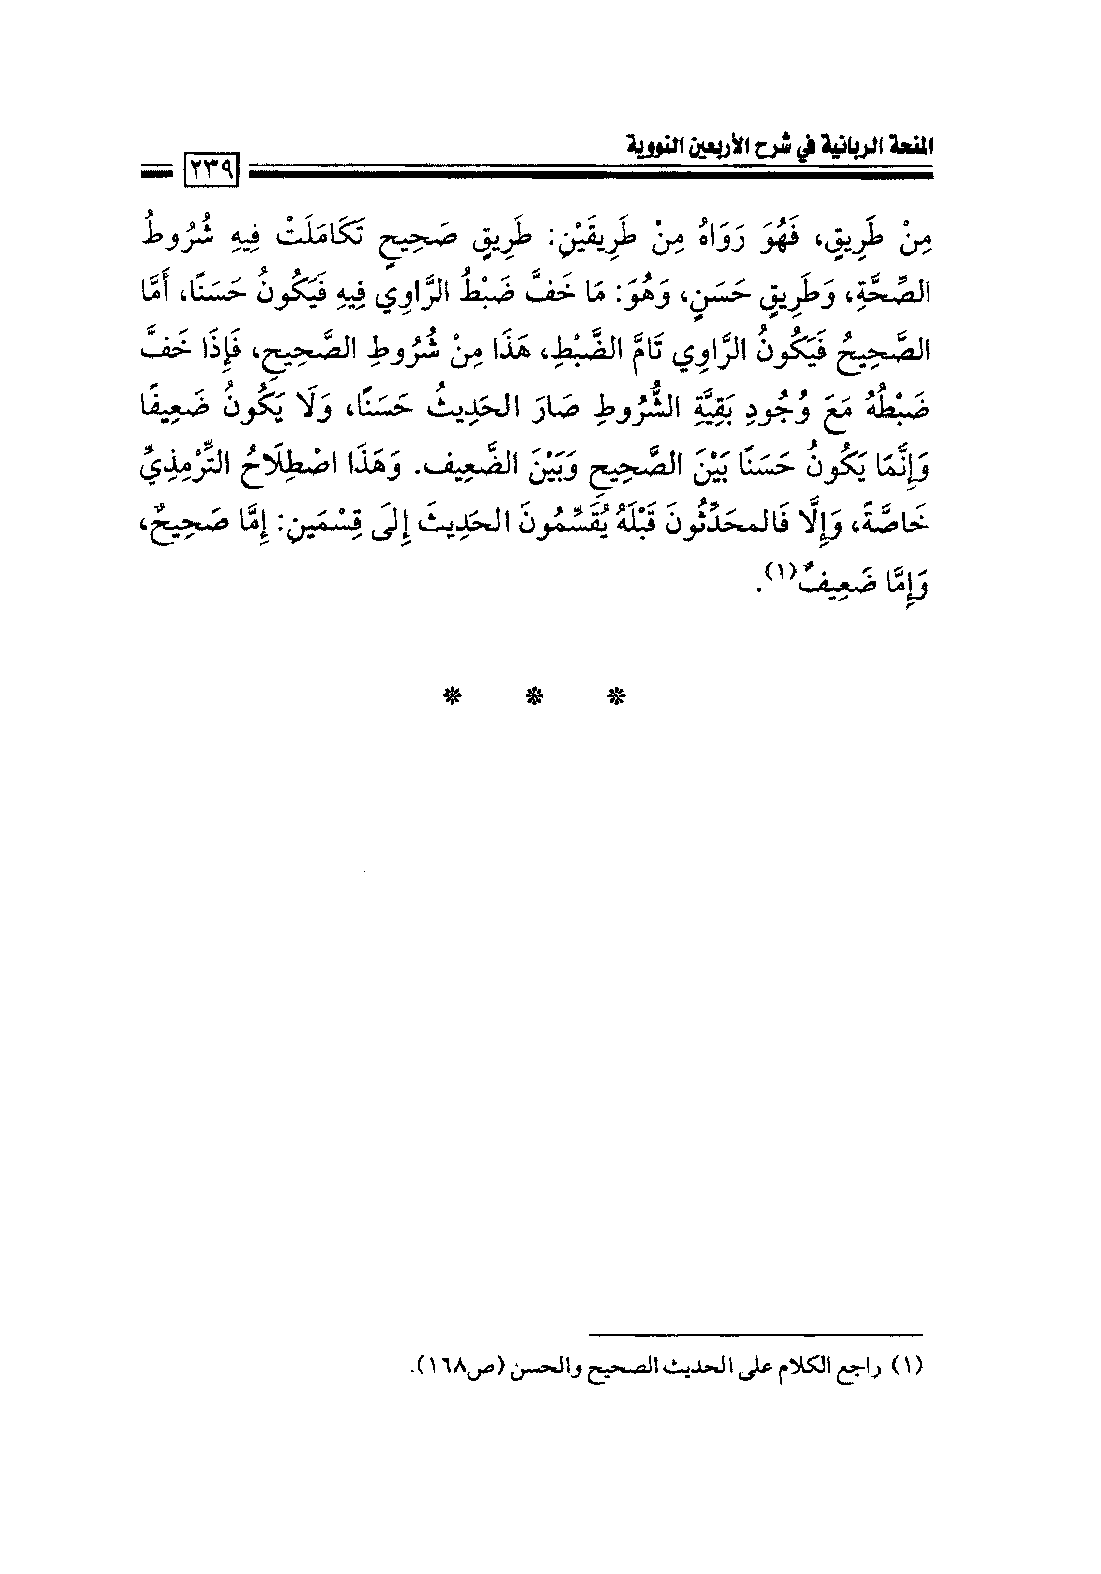 Page 241